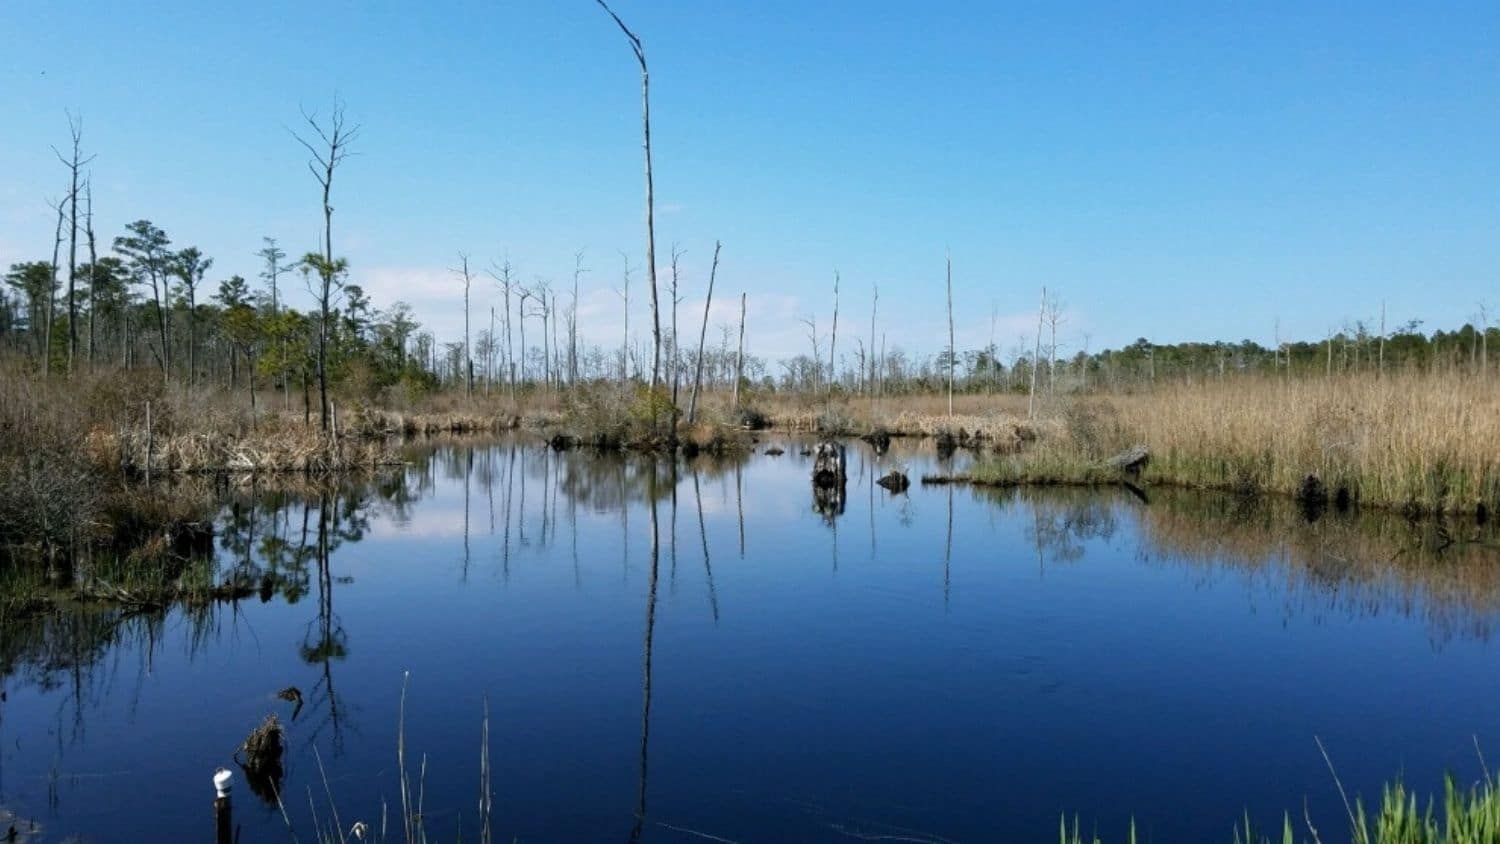 Ghost forest in North Carolina. - Microbes Making Tree Methane ‘Farts’ in Ghost Forests Are in the Soils, Study Says - Forestry and Environmental Resources NC State University